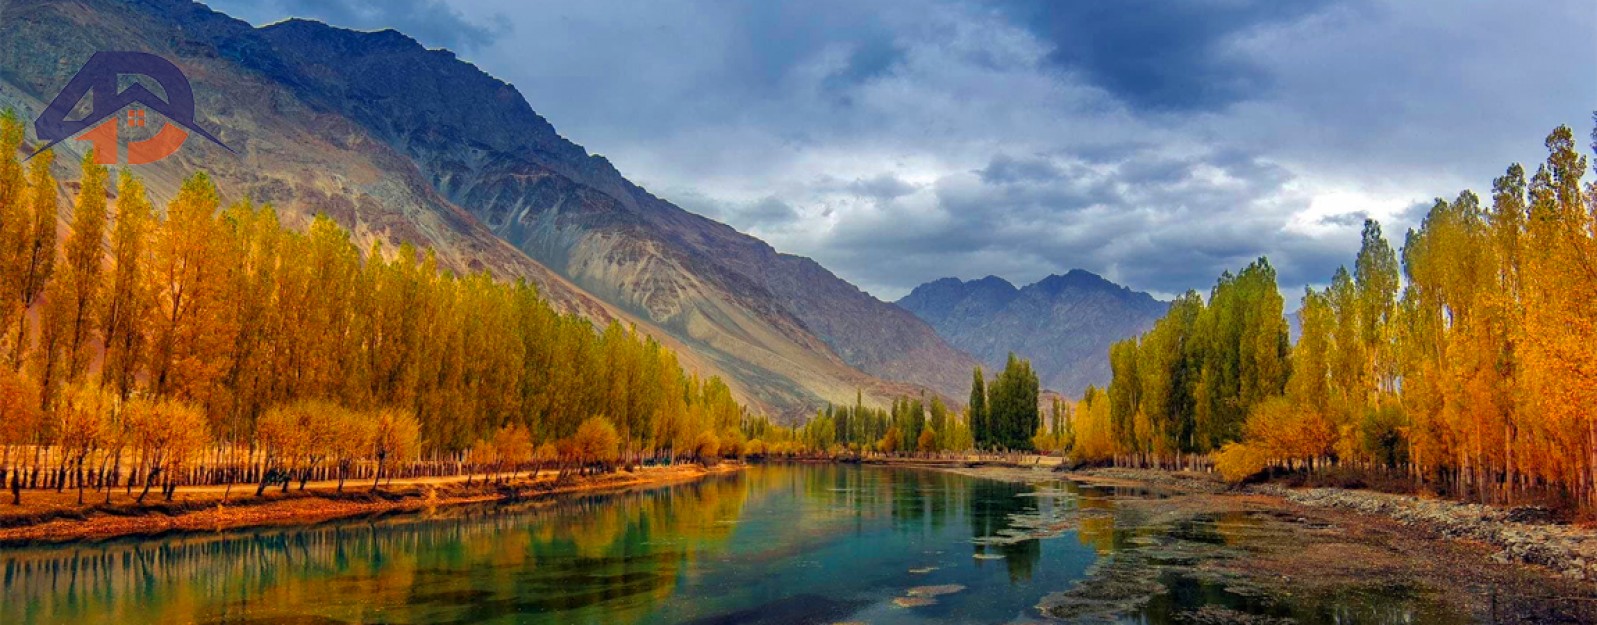 Ever Best Holiday Destinations in Pakistan